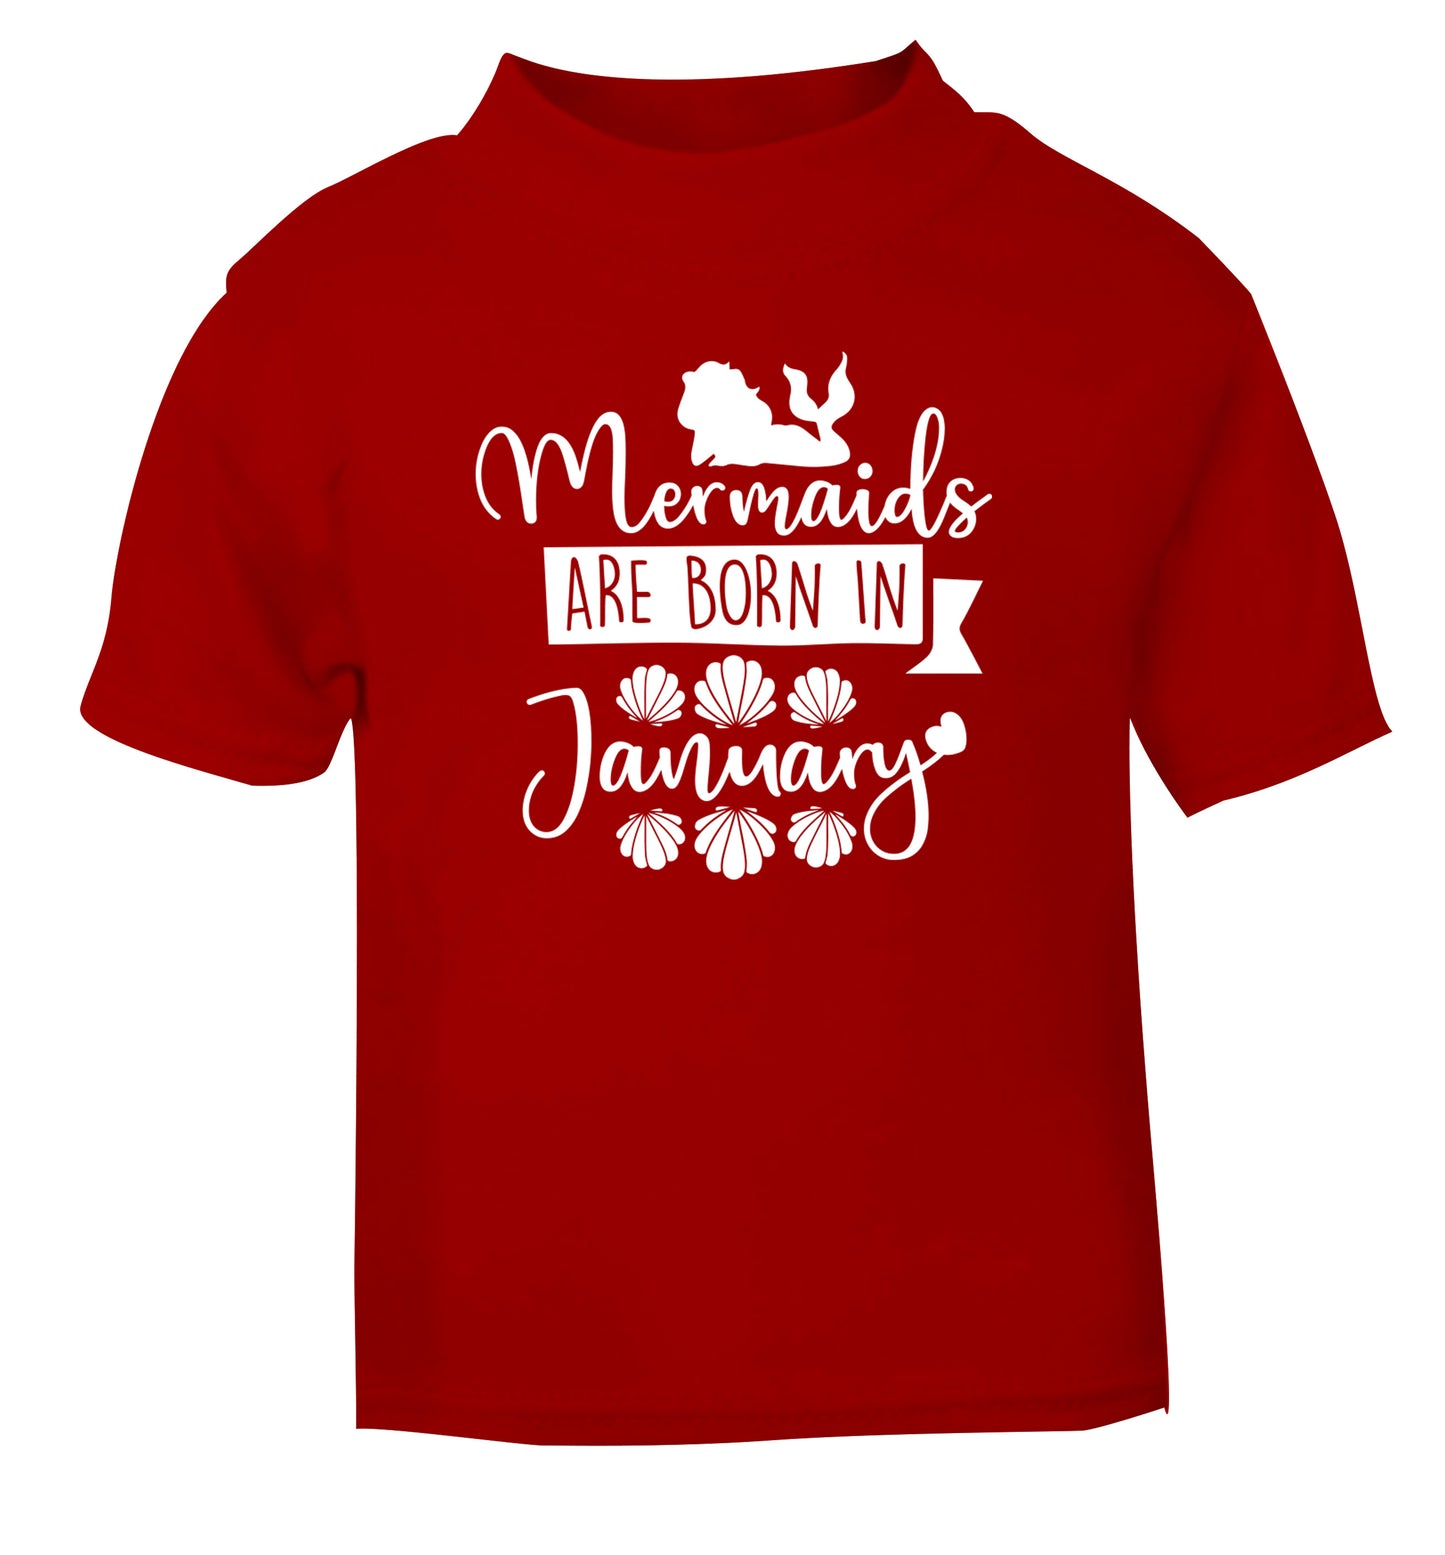 Mermaids are born in January red Baby Toddler Tshirt 2 Years